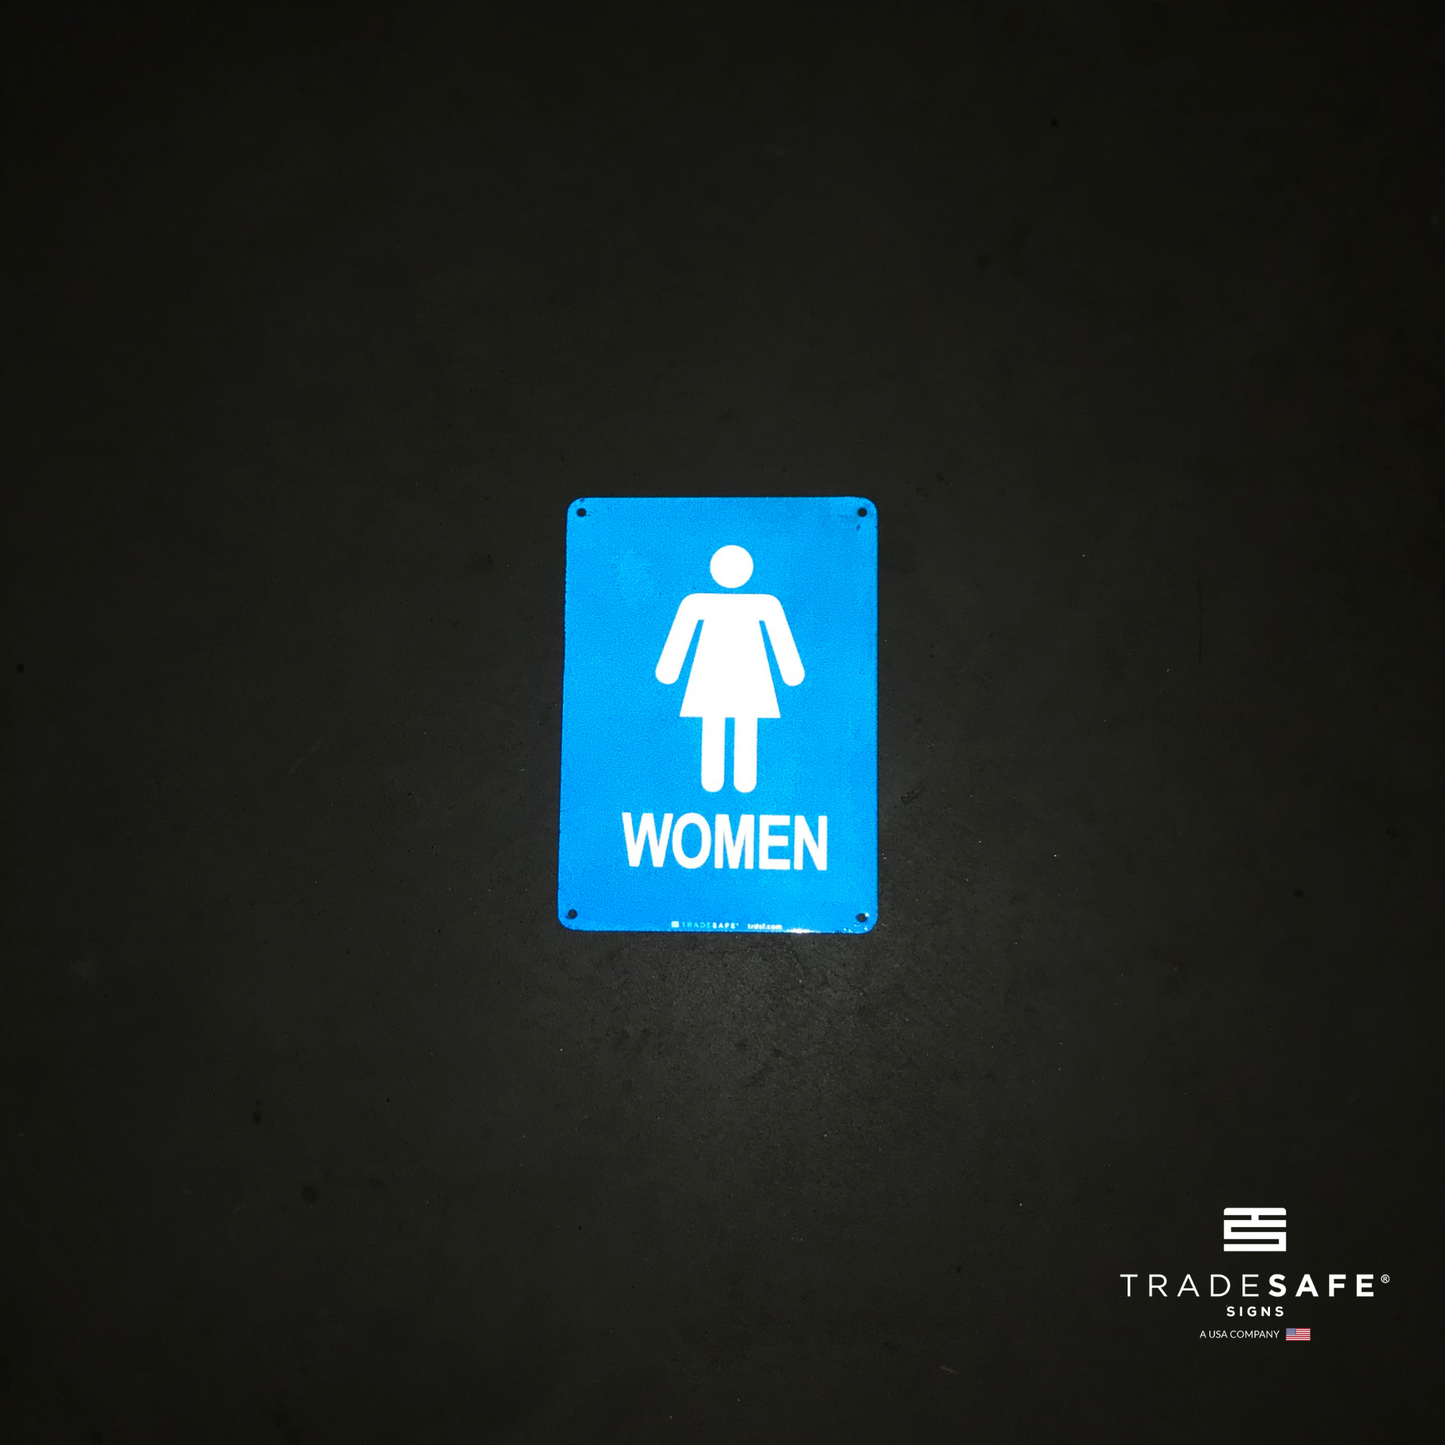 reflective attribute of women's restroom sign on black background